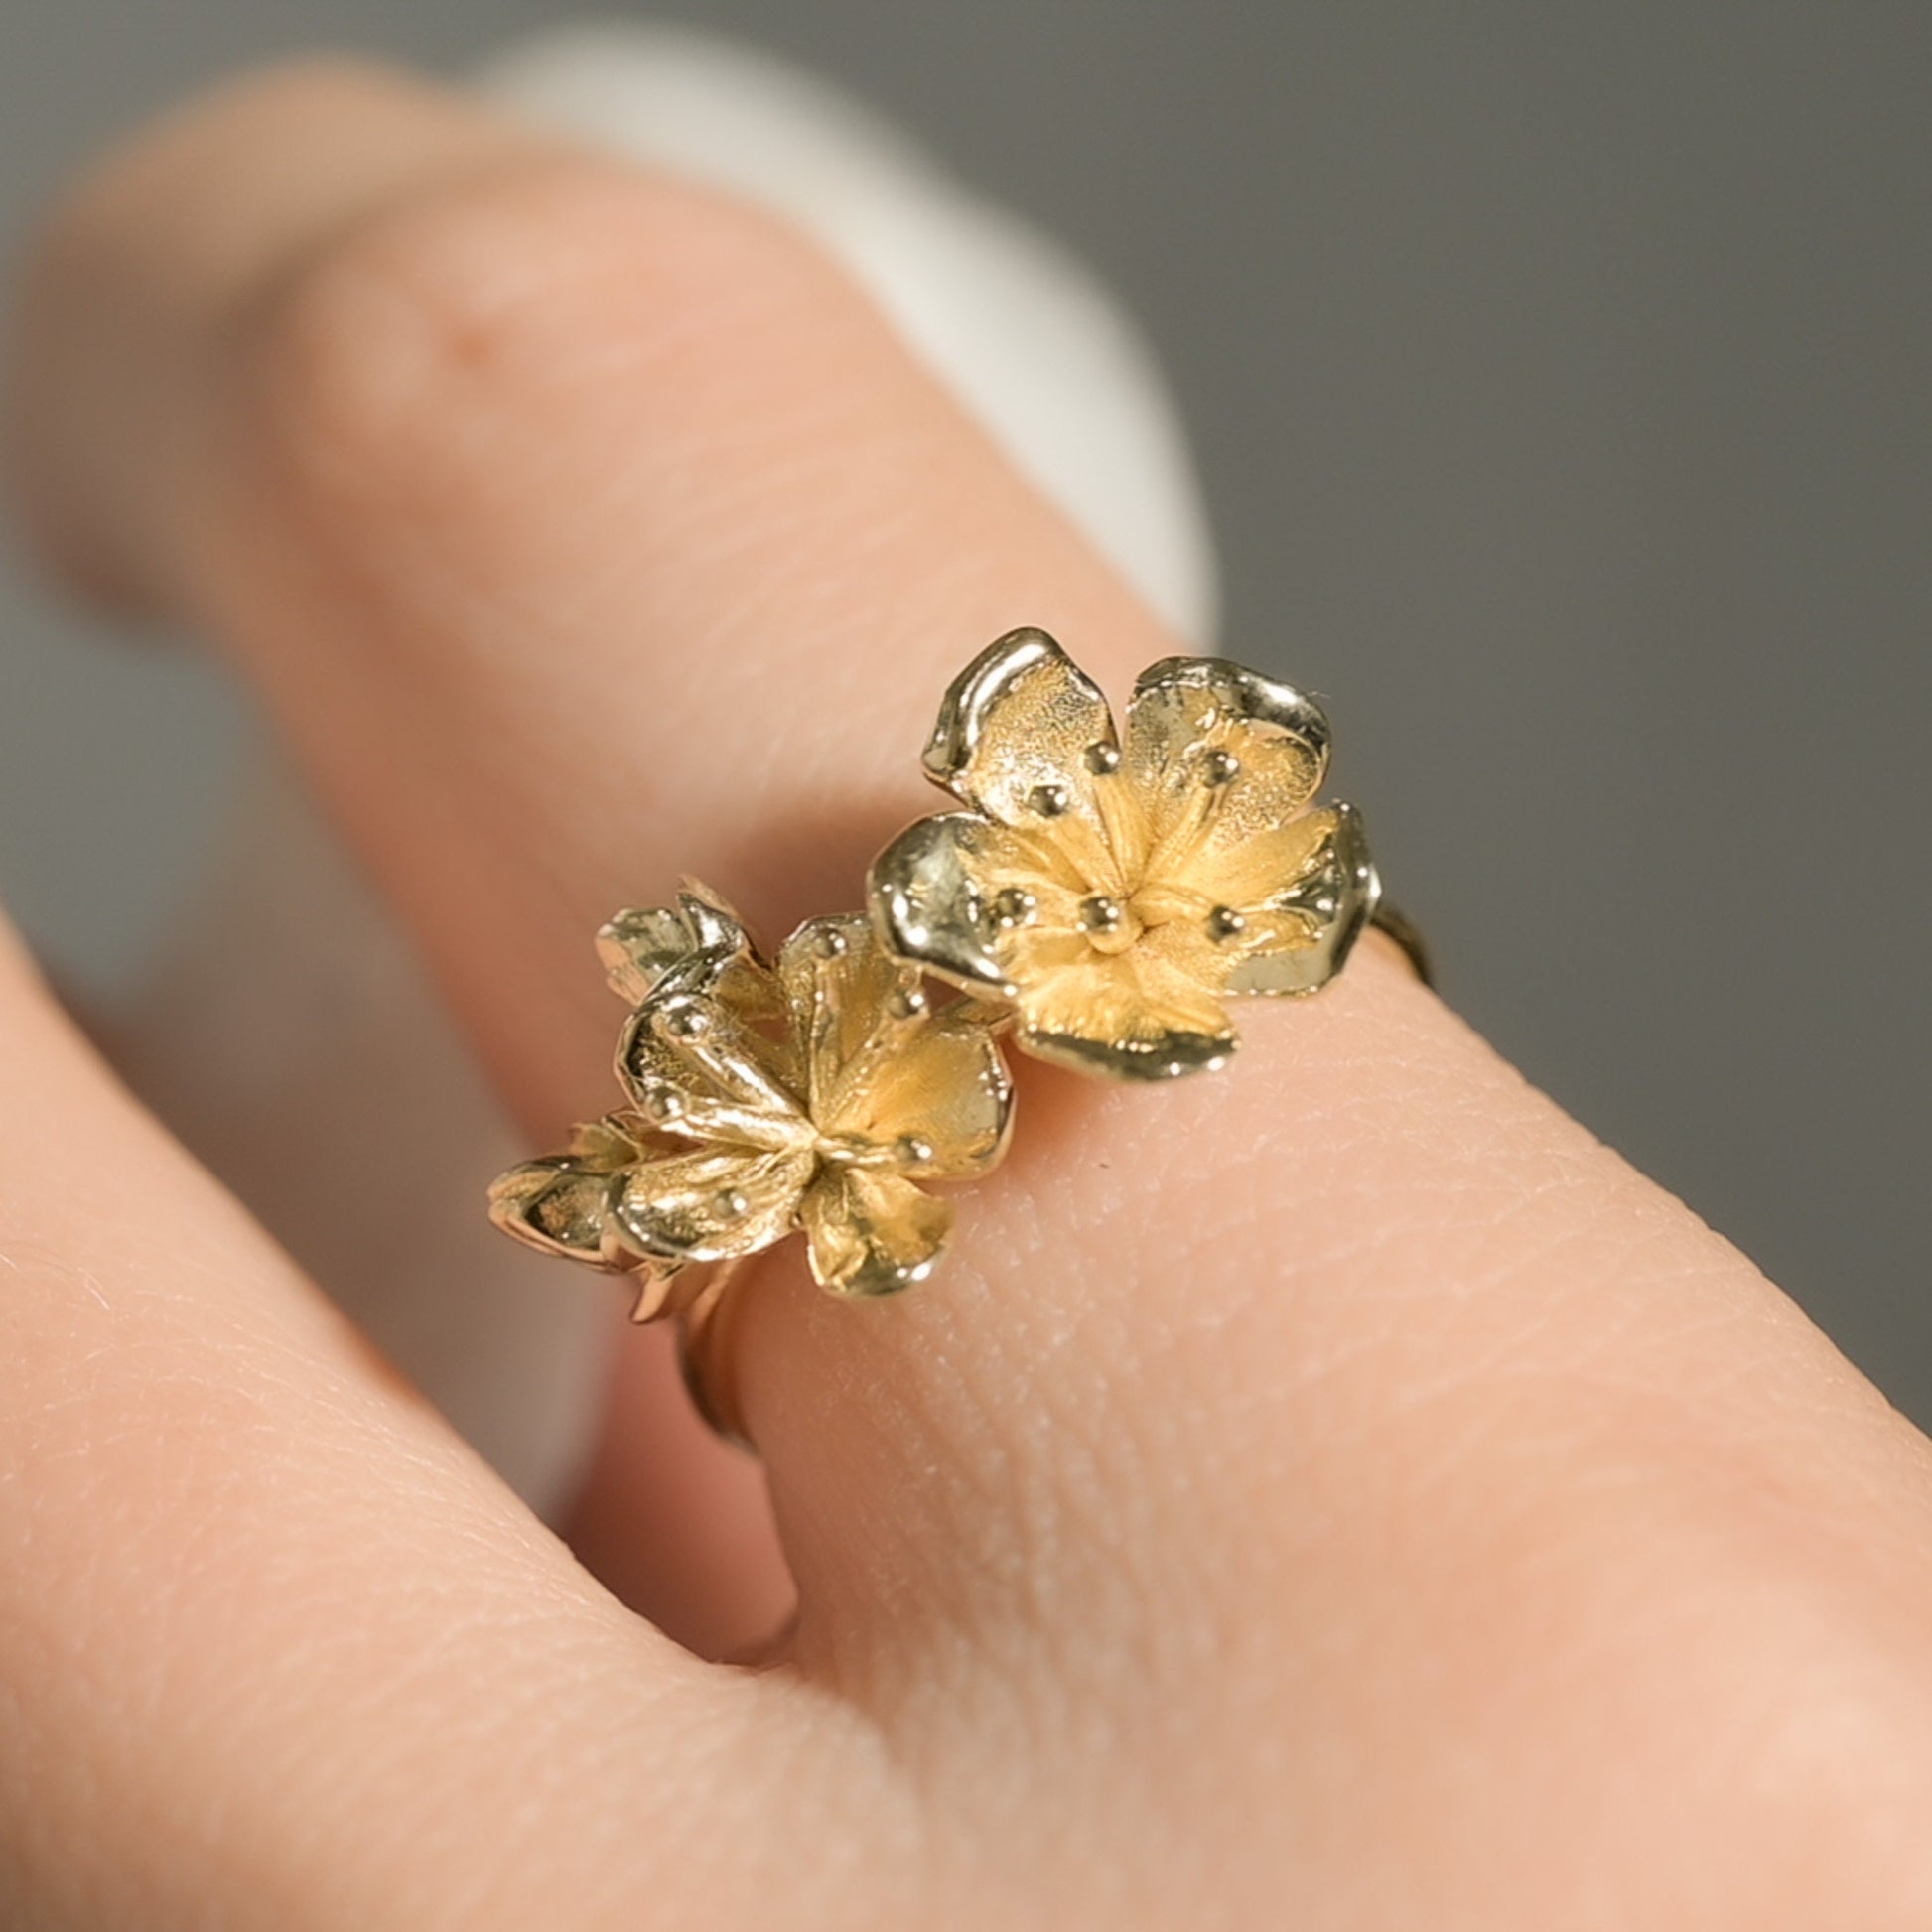 Cherry Blossom Flower Ring in Solid Gold